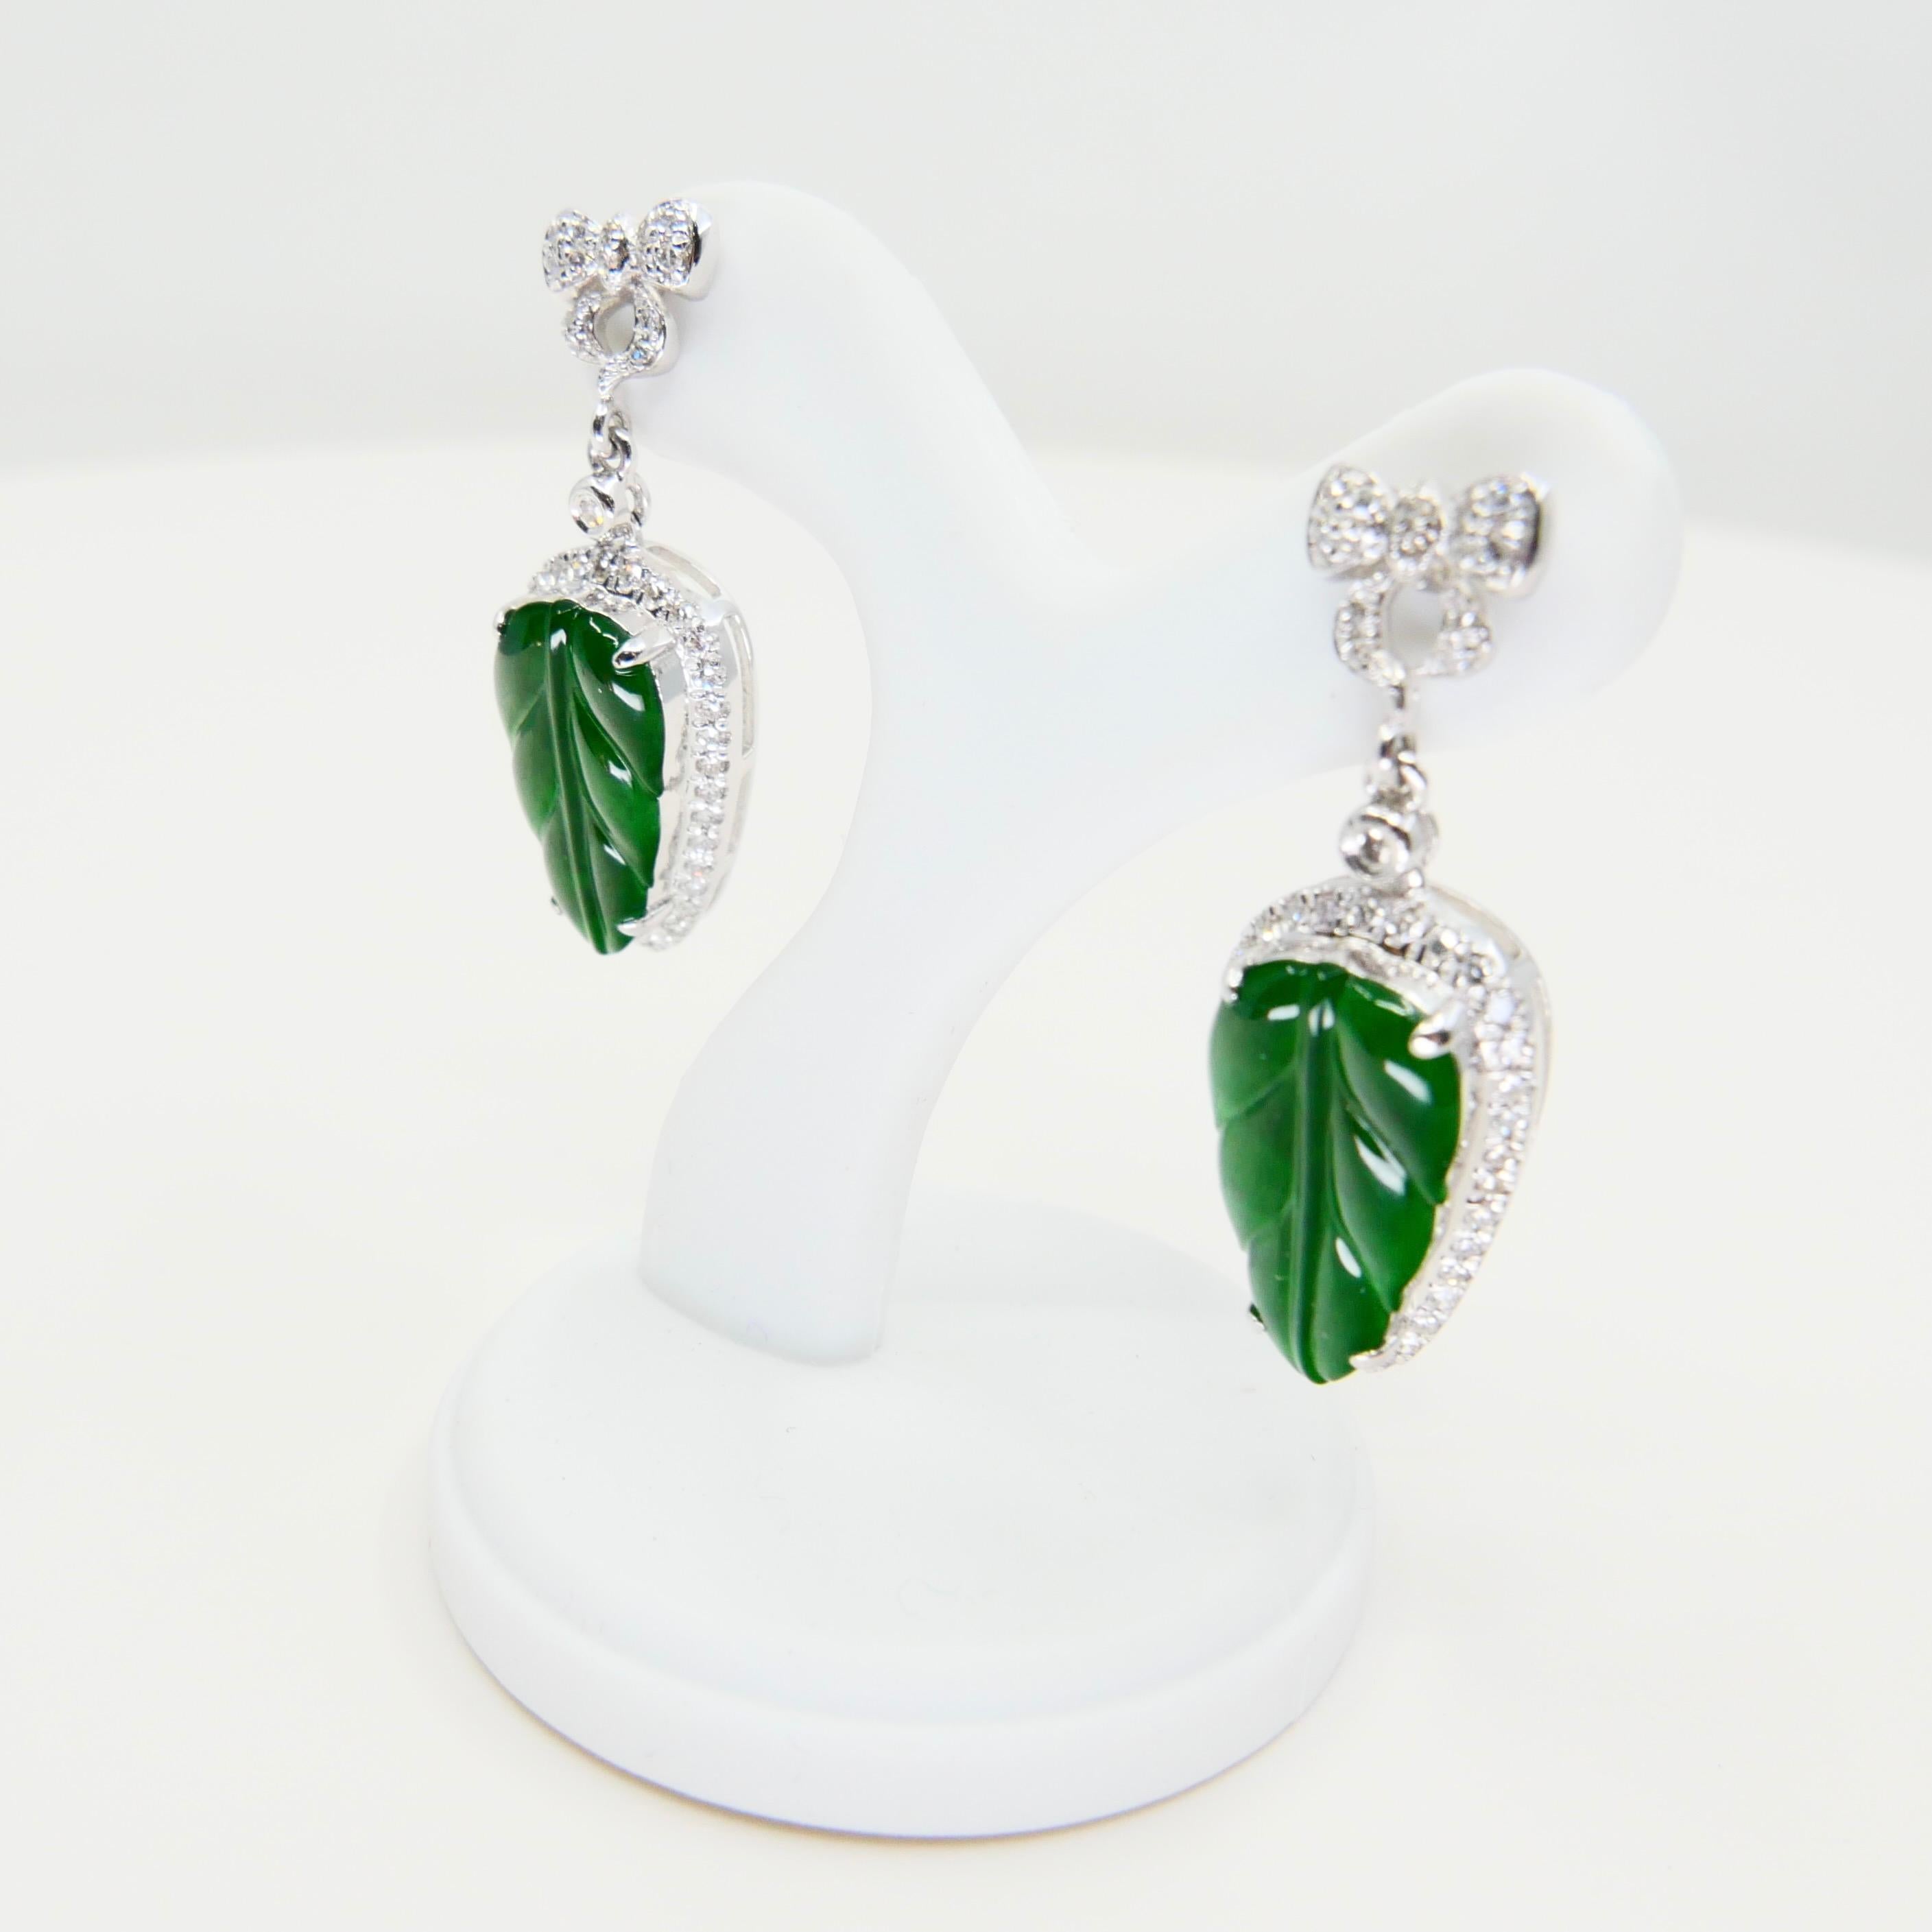 Certified Icy Imperial Green Jade & Diamond Earrings, Collector's Quality For Sale 6